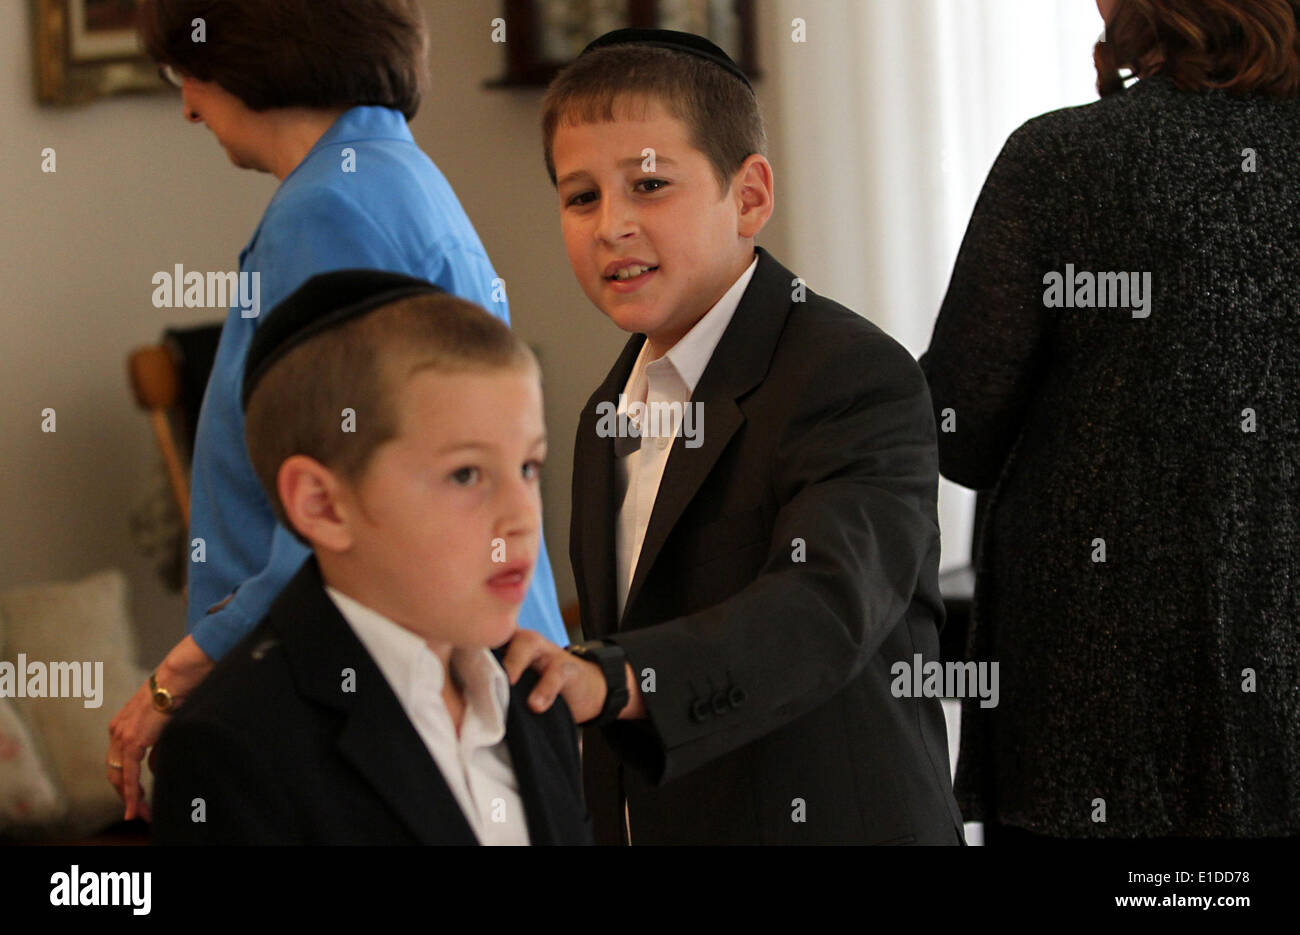 (140601) -- JERUSALEM, June 1, 2014 (Xinhua) -- Tzviel Noyman (C) is seen with his family at their home in Beit Shemesh, about 20 km from Jerusalem, on May 30, 2014. Tzviel Noyman is an Israeli Ultra-Orthodox boy in a family with six children, three boys and three girls. He is ten years old this year and a grade three pupil of Torat Moshe elementary school, which is only opened to Jewish children. Tzviel has eight classes each day, including Hebrew, English, mathematics and Jewish religion, which has four classes each day including Talmud, Mishnah and Gemara. Tzviel likes the religion class be Stock Photo